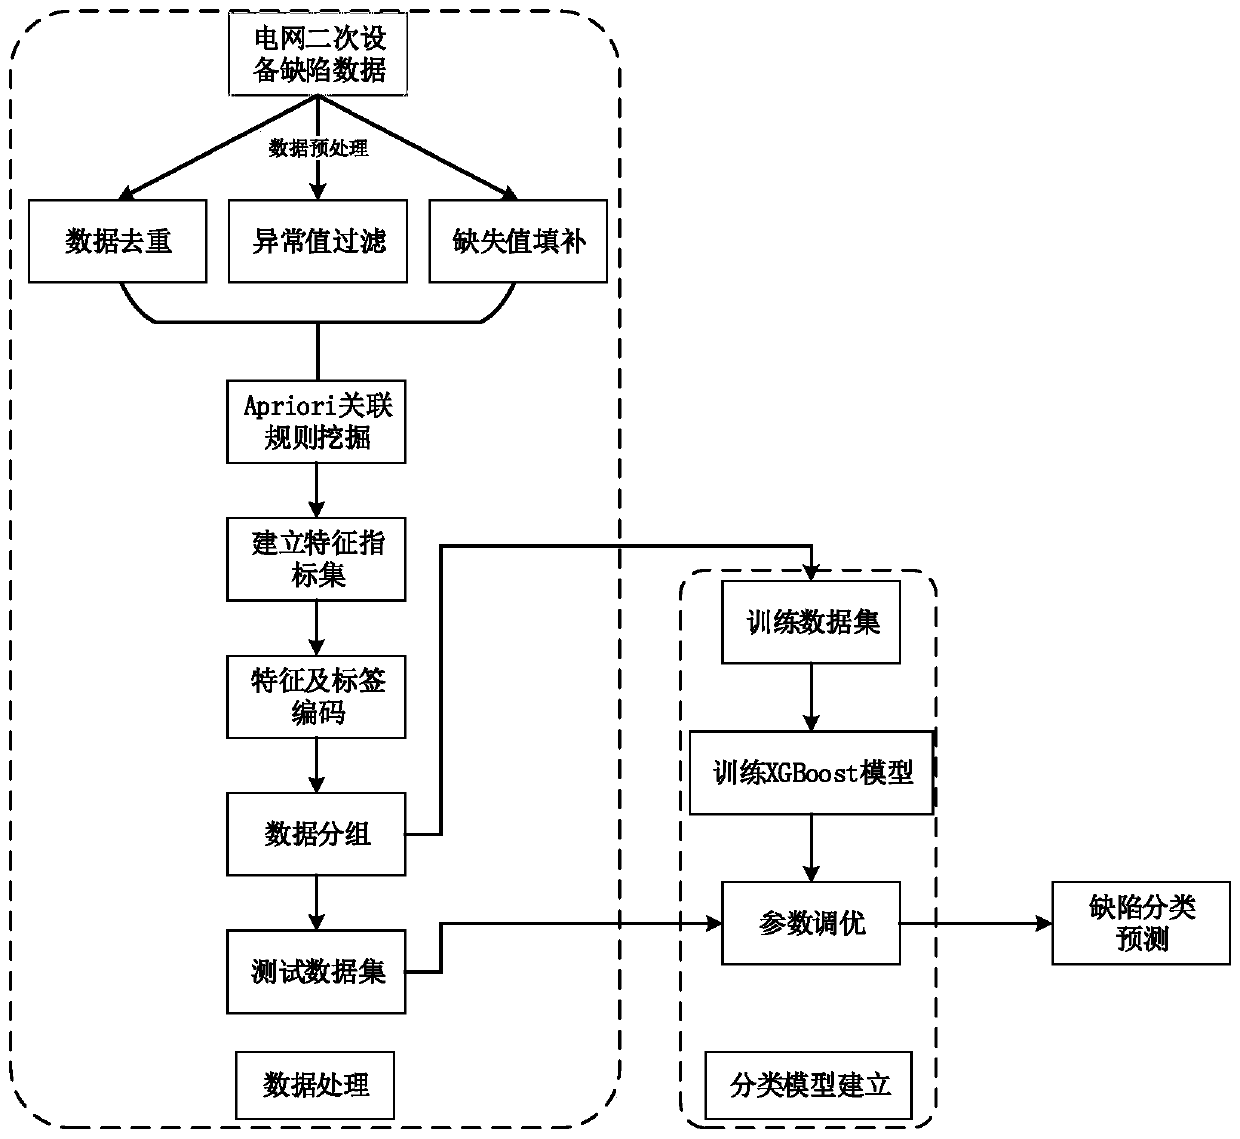 XGBoost-based electric power secondary equipment defect degree evaluation method